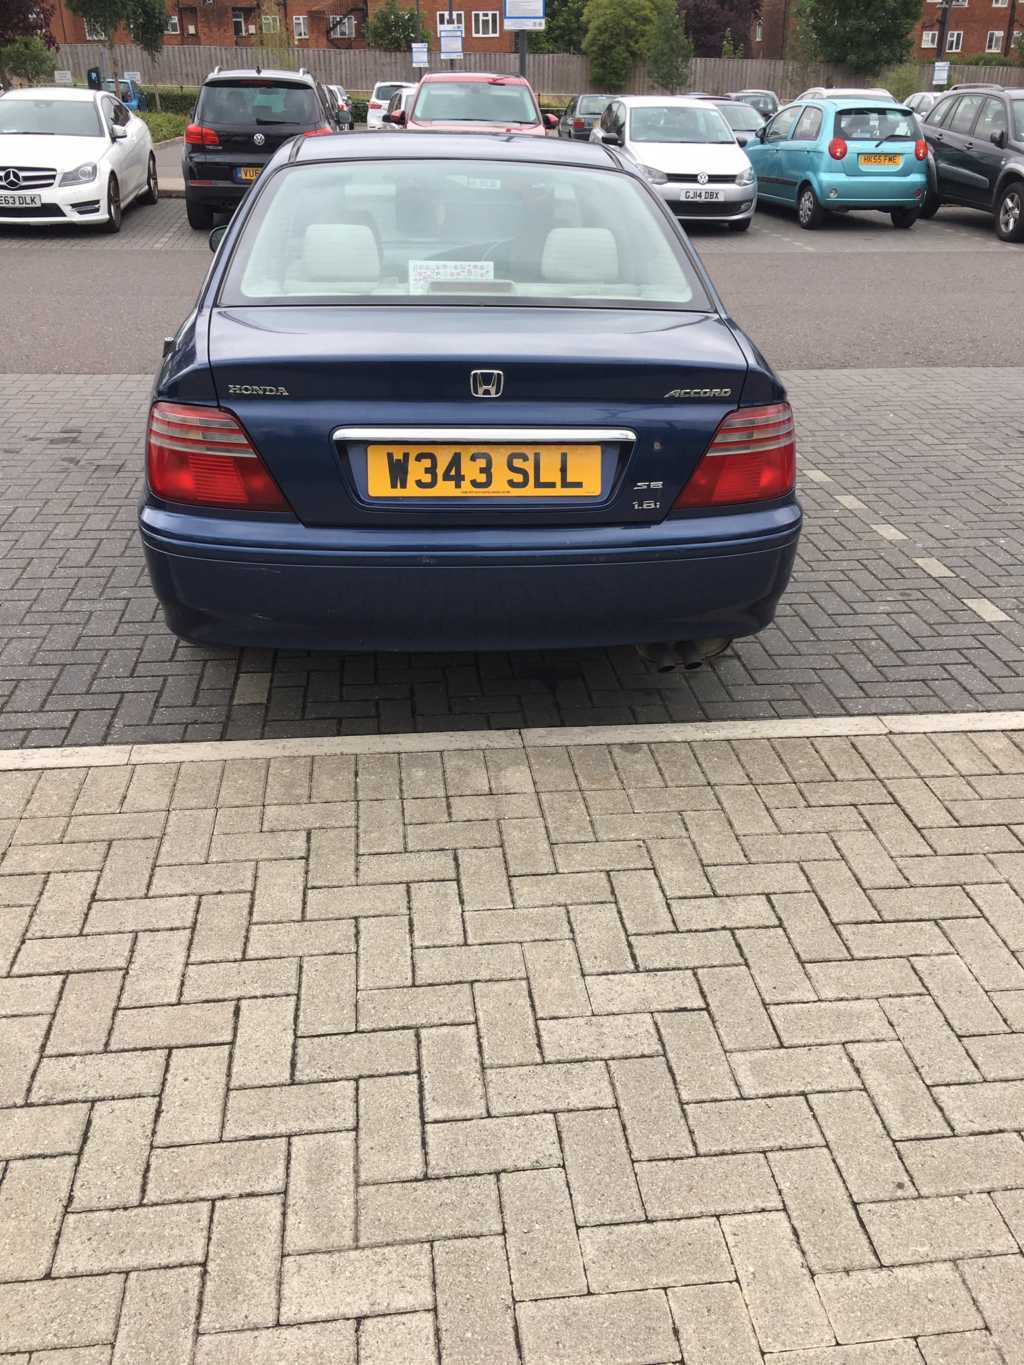 W343 SLL is a crap parker